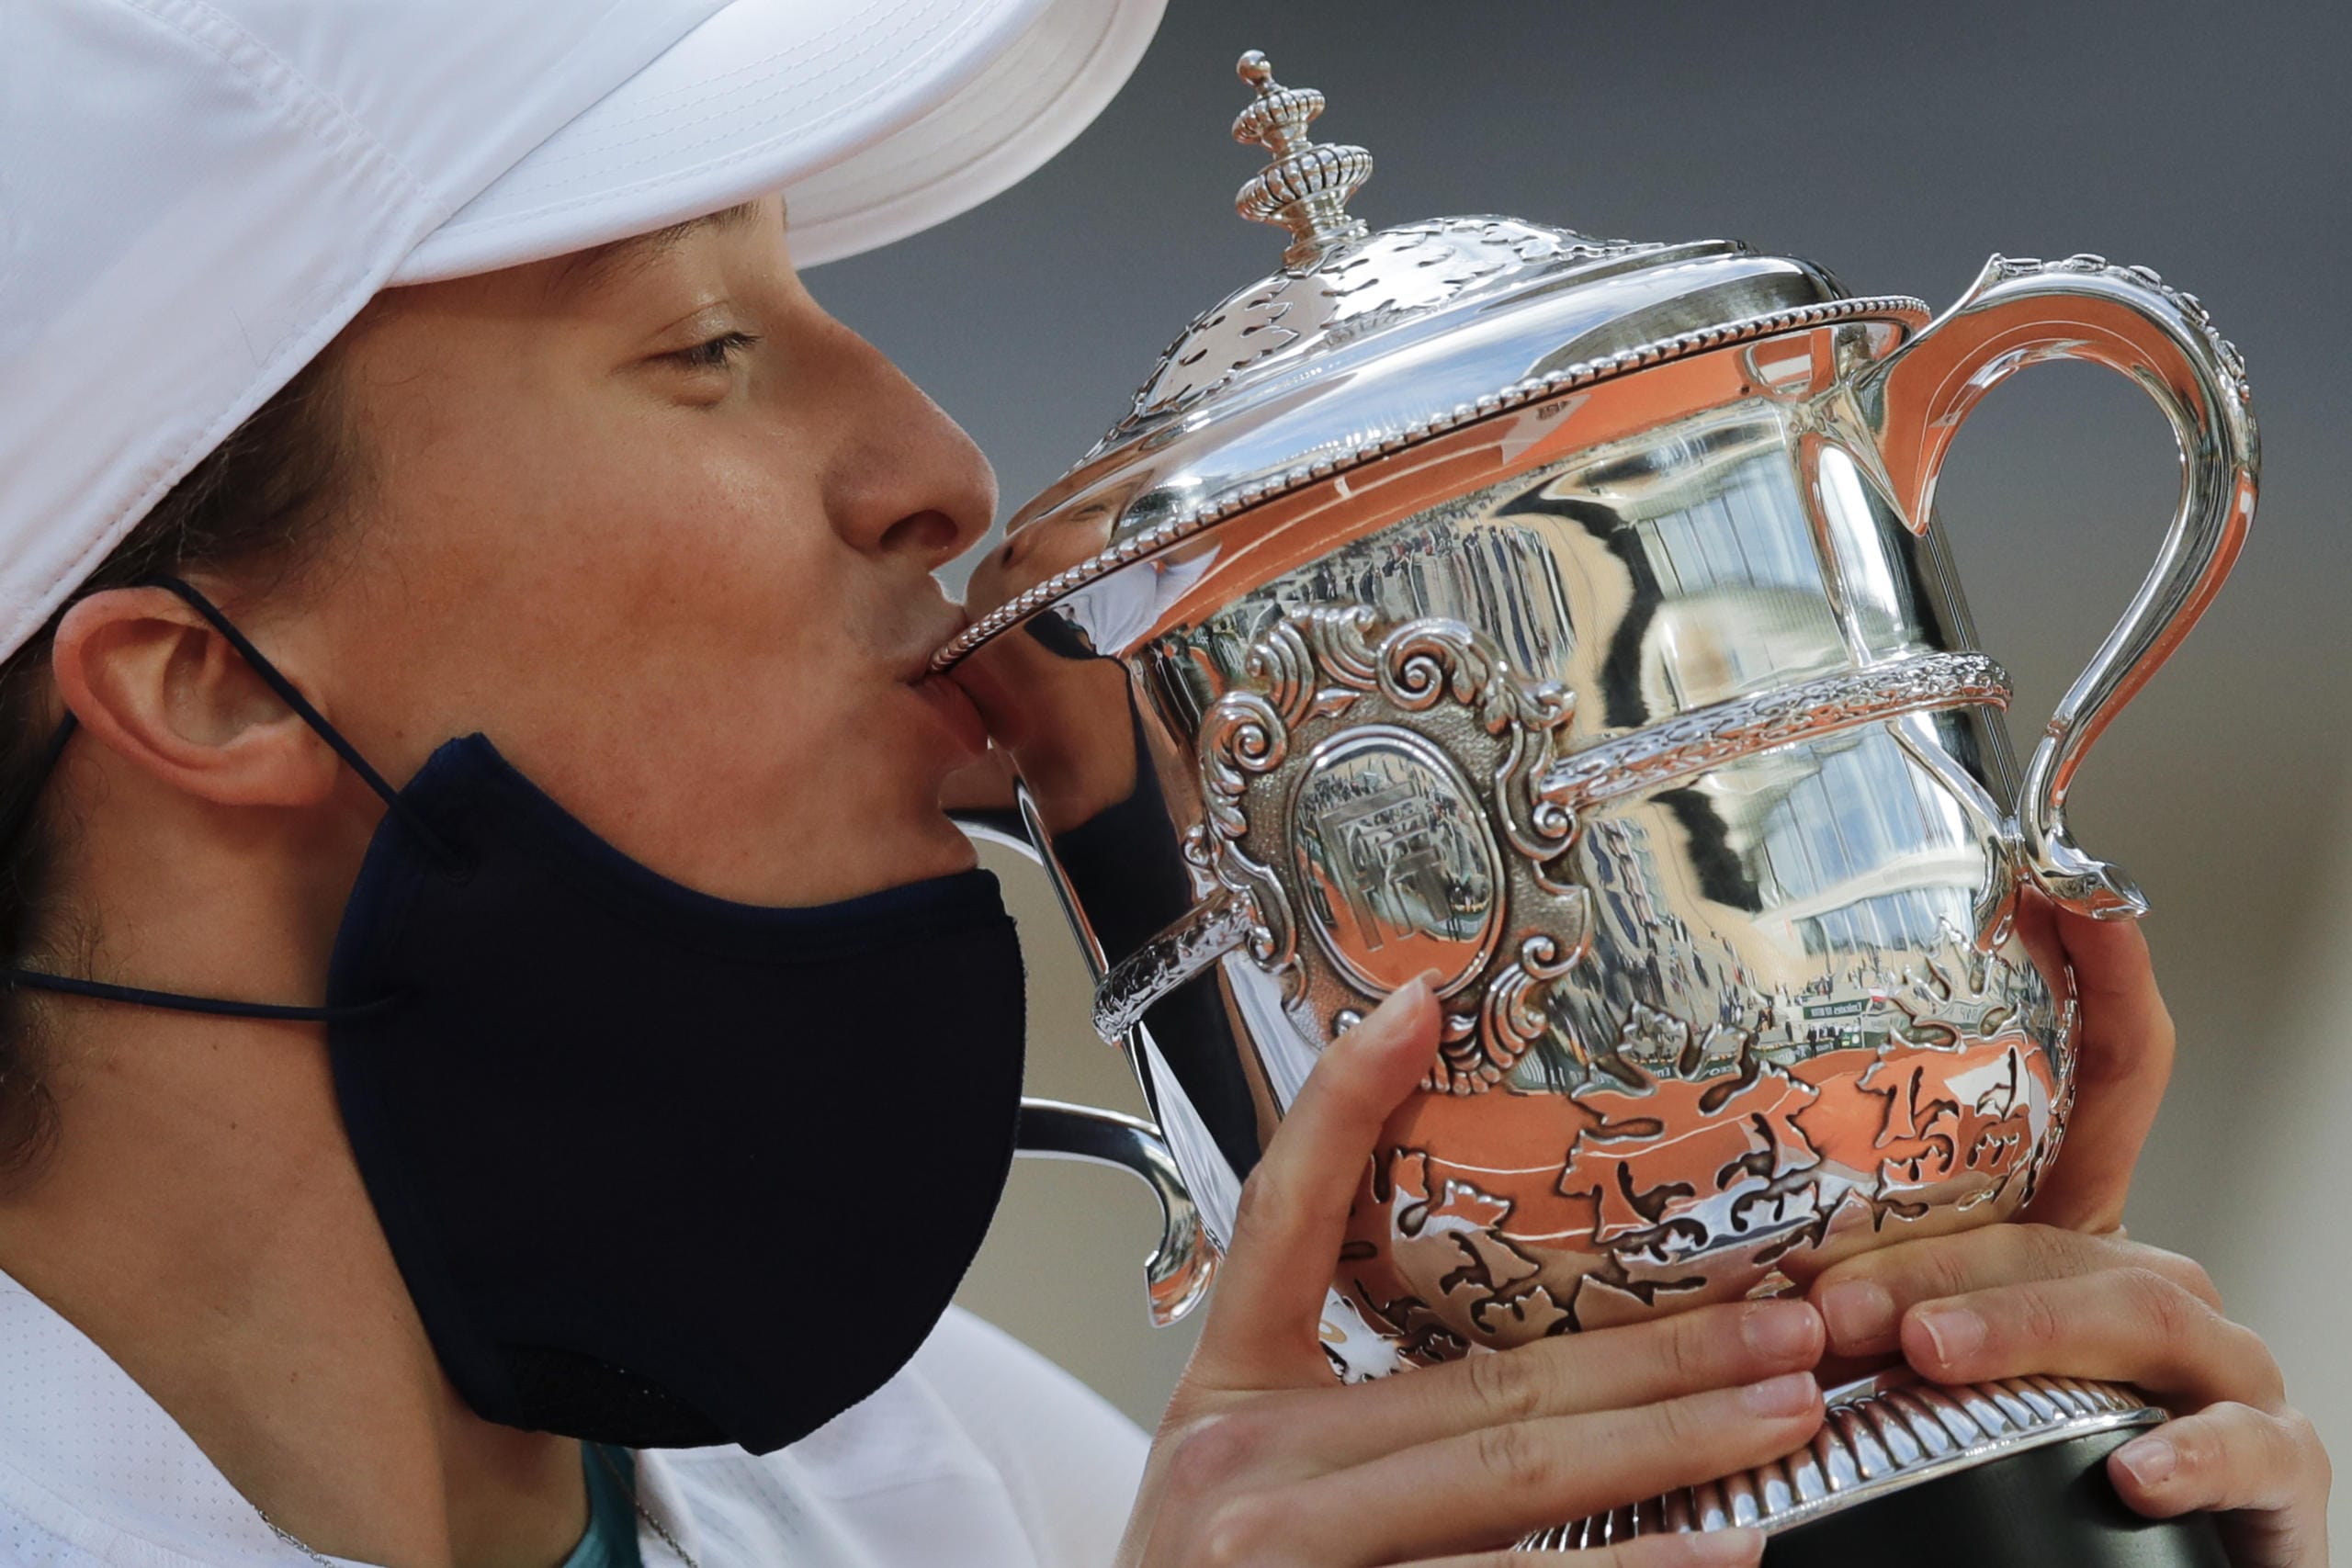 Poland's Iga Swiatek kisses the trophy after winning the final match of the French Open tennis tournament against Sofia Kenin of the U.S. in two sets 6-4, 6-1, at the Roland Garros stadium in Paris, France, Saturday, Oct. 10, 2020.